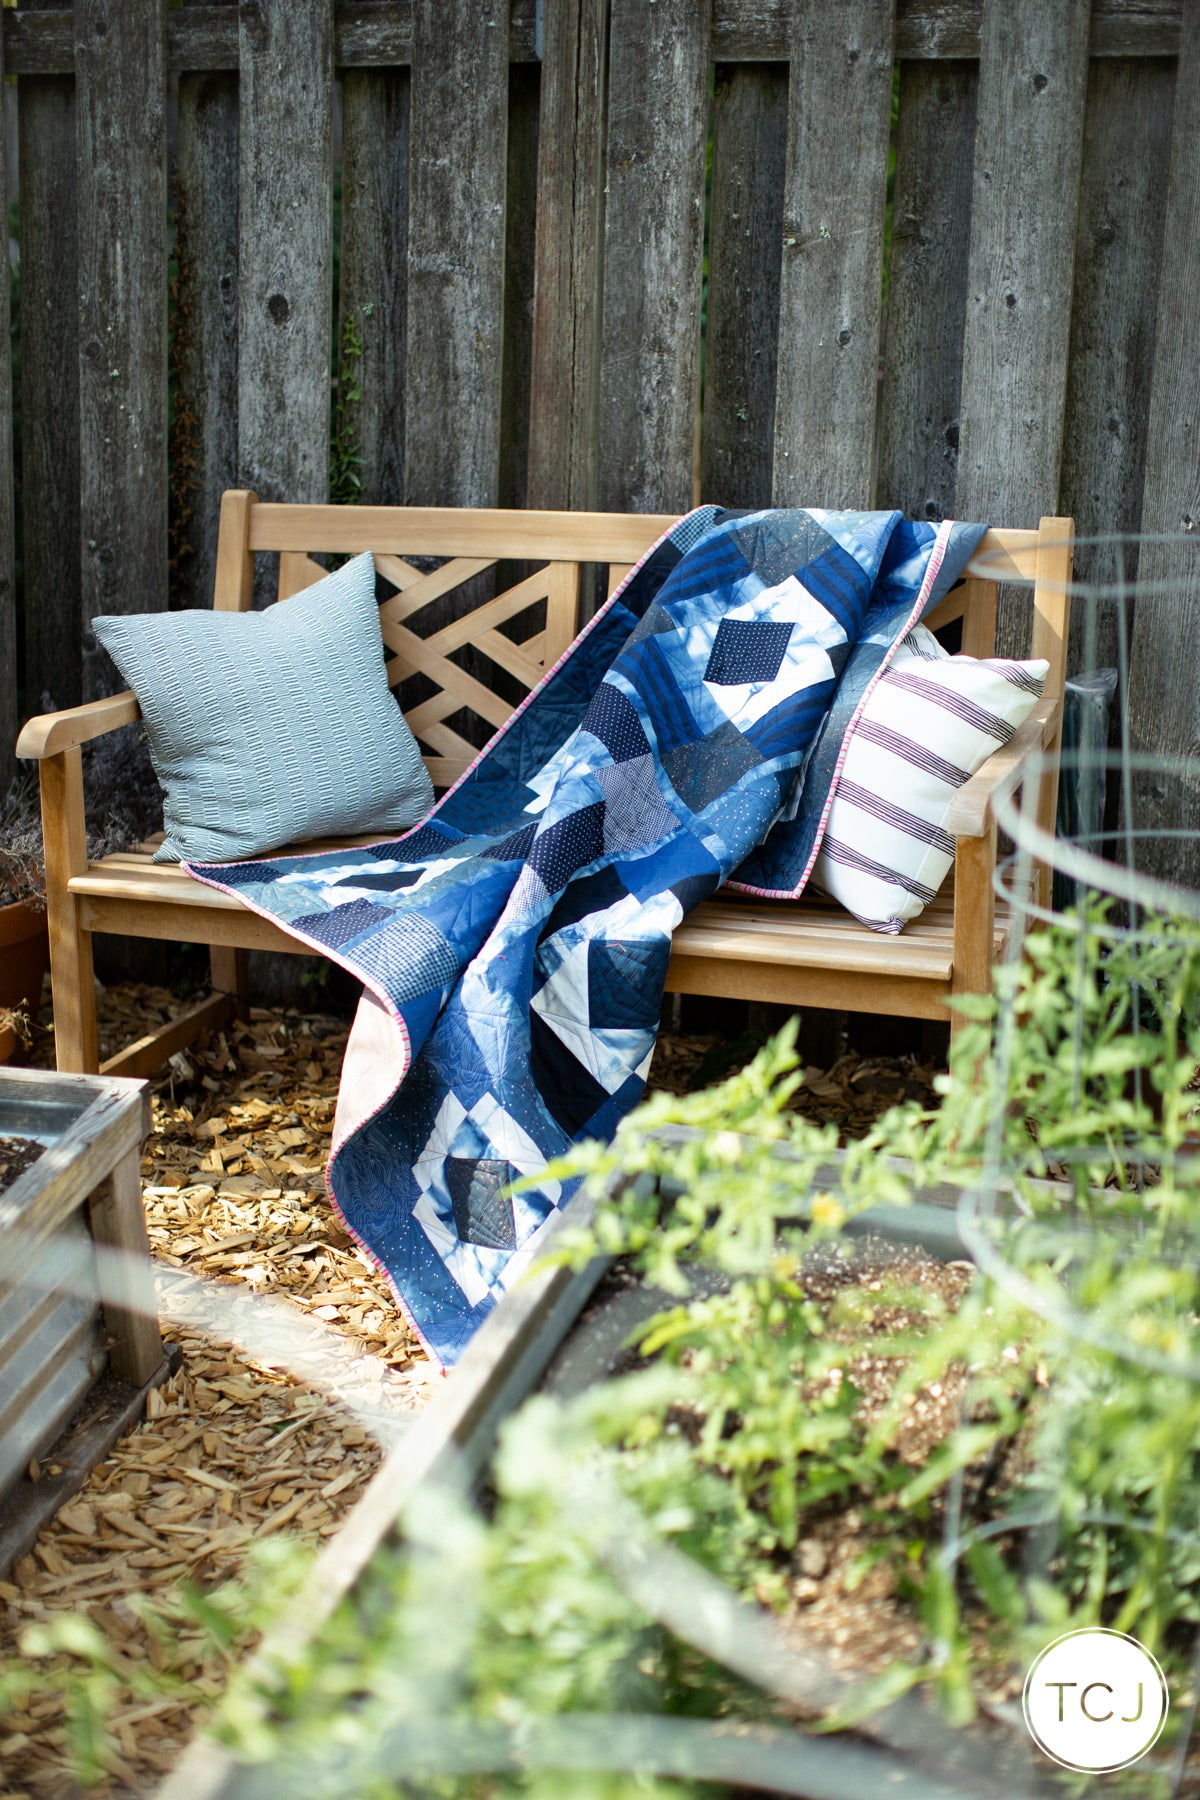 Backyard Party Quilt Pattern - Printed